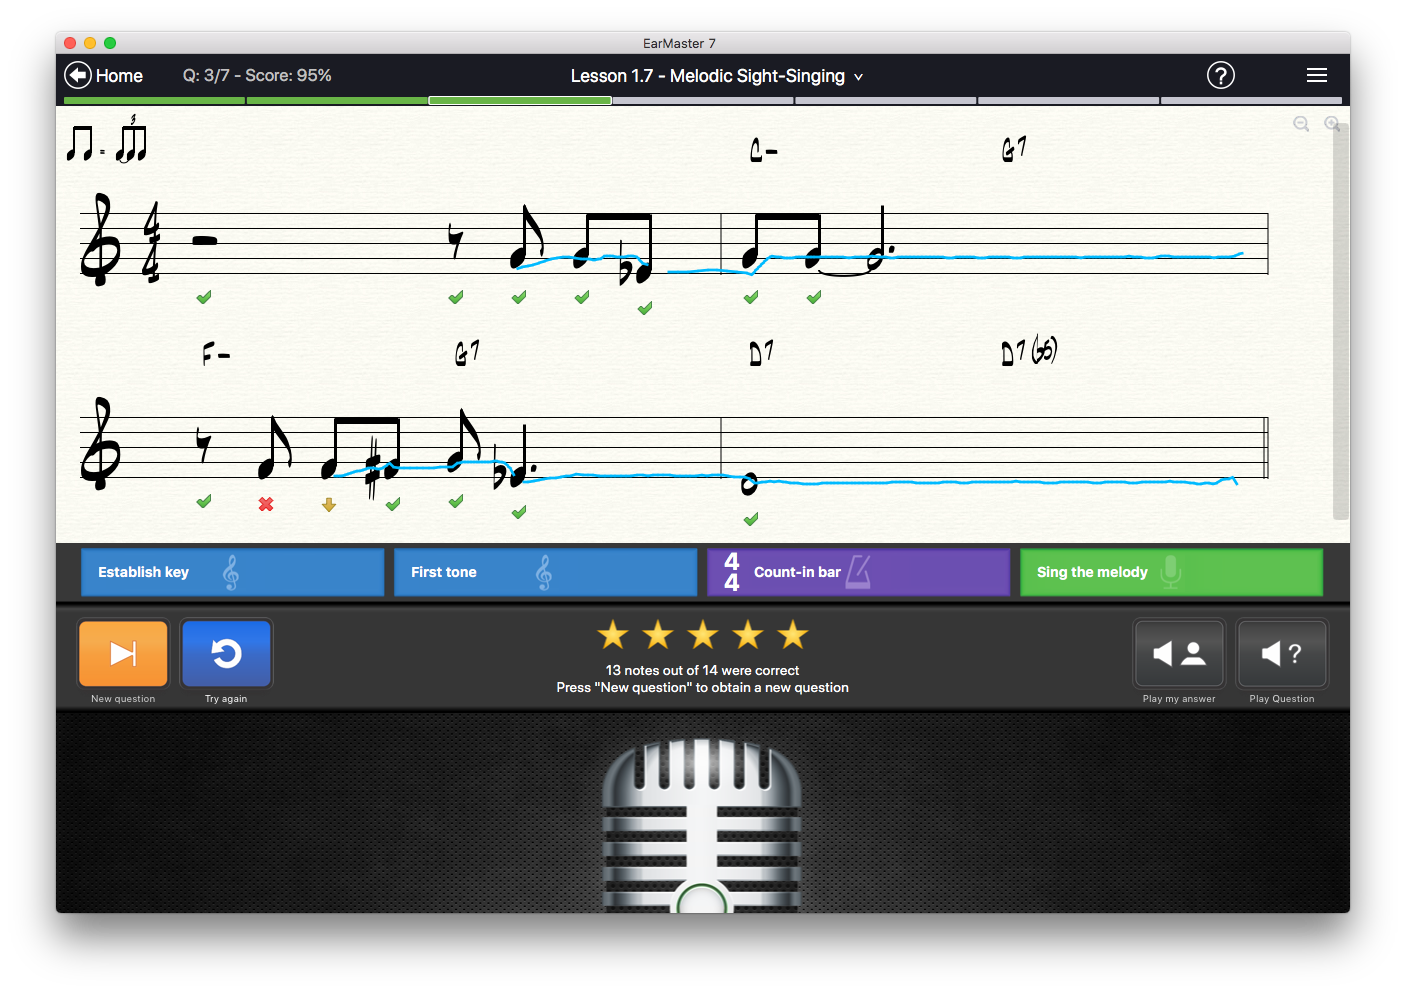 KVR EarMaster 7 Music Theory and Ear Training Software Released